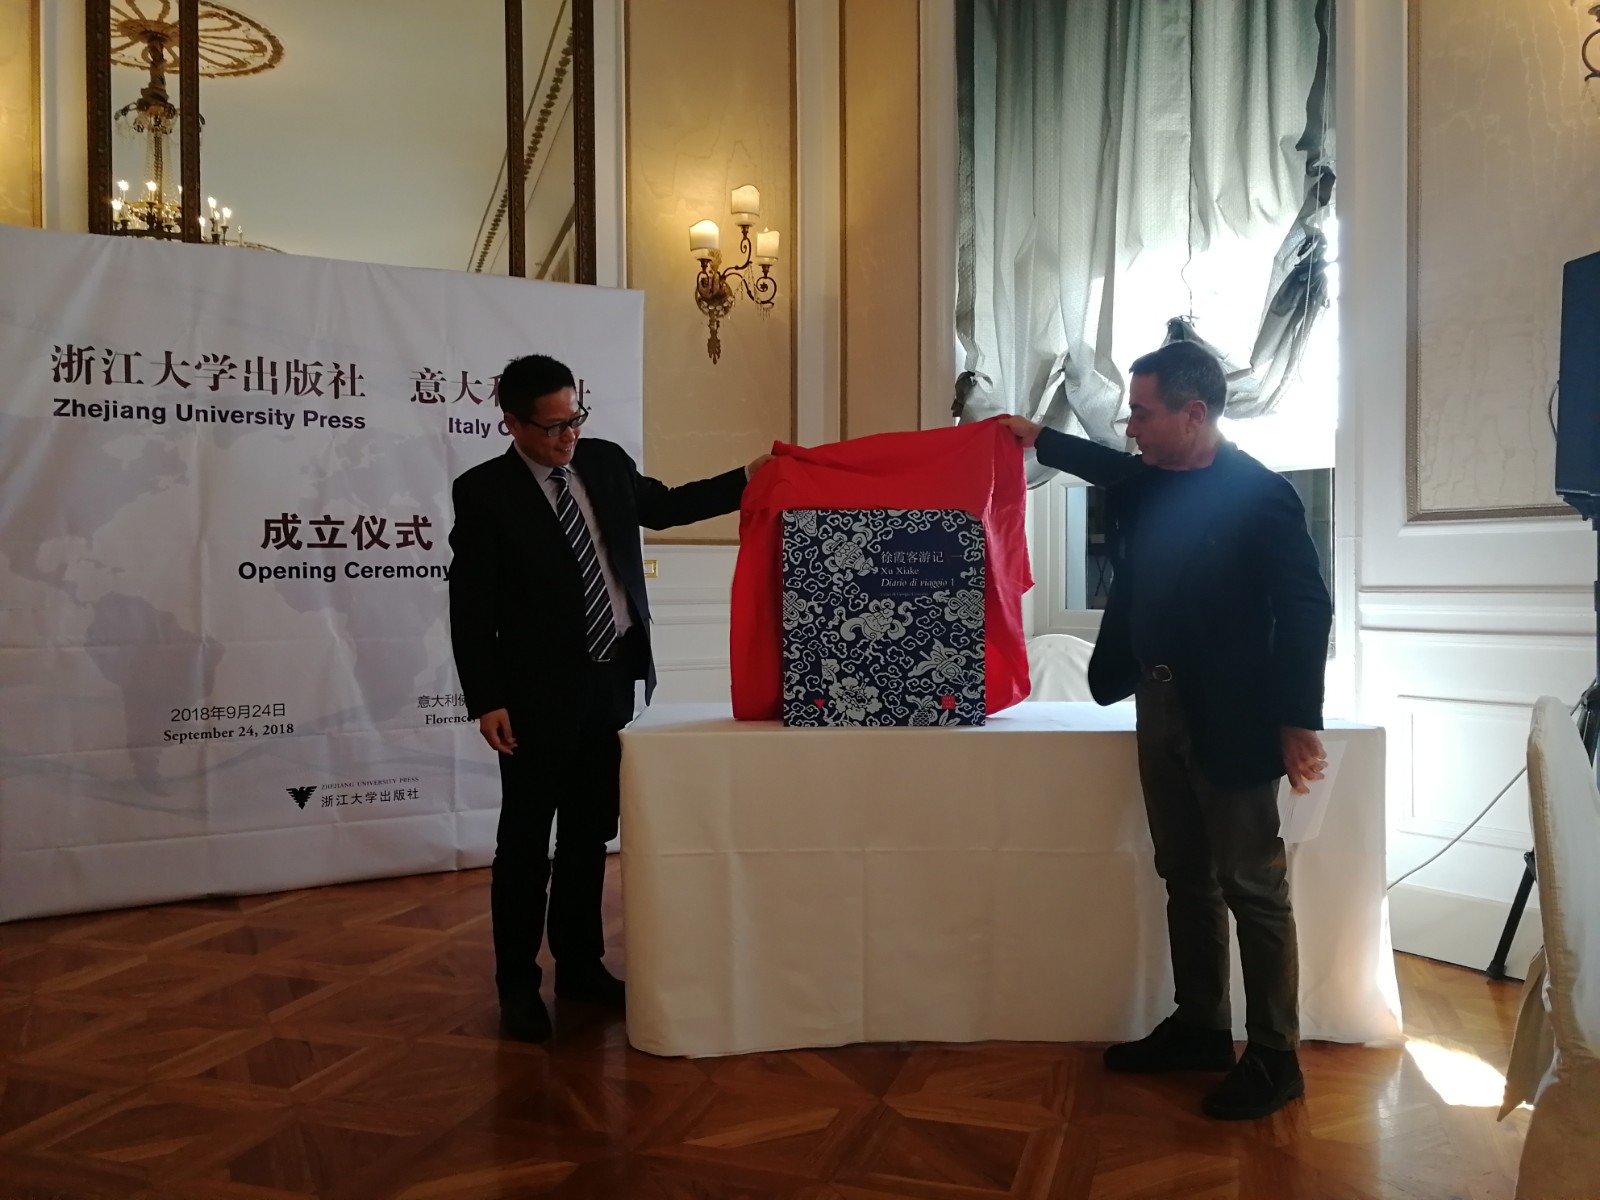 Italian Edition of the Travels of XU Xiake Is Released for the First Time at the Unveiling of Zhejiang University Press Italian Office